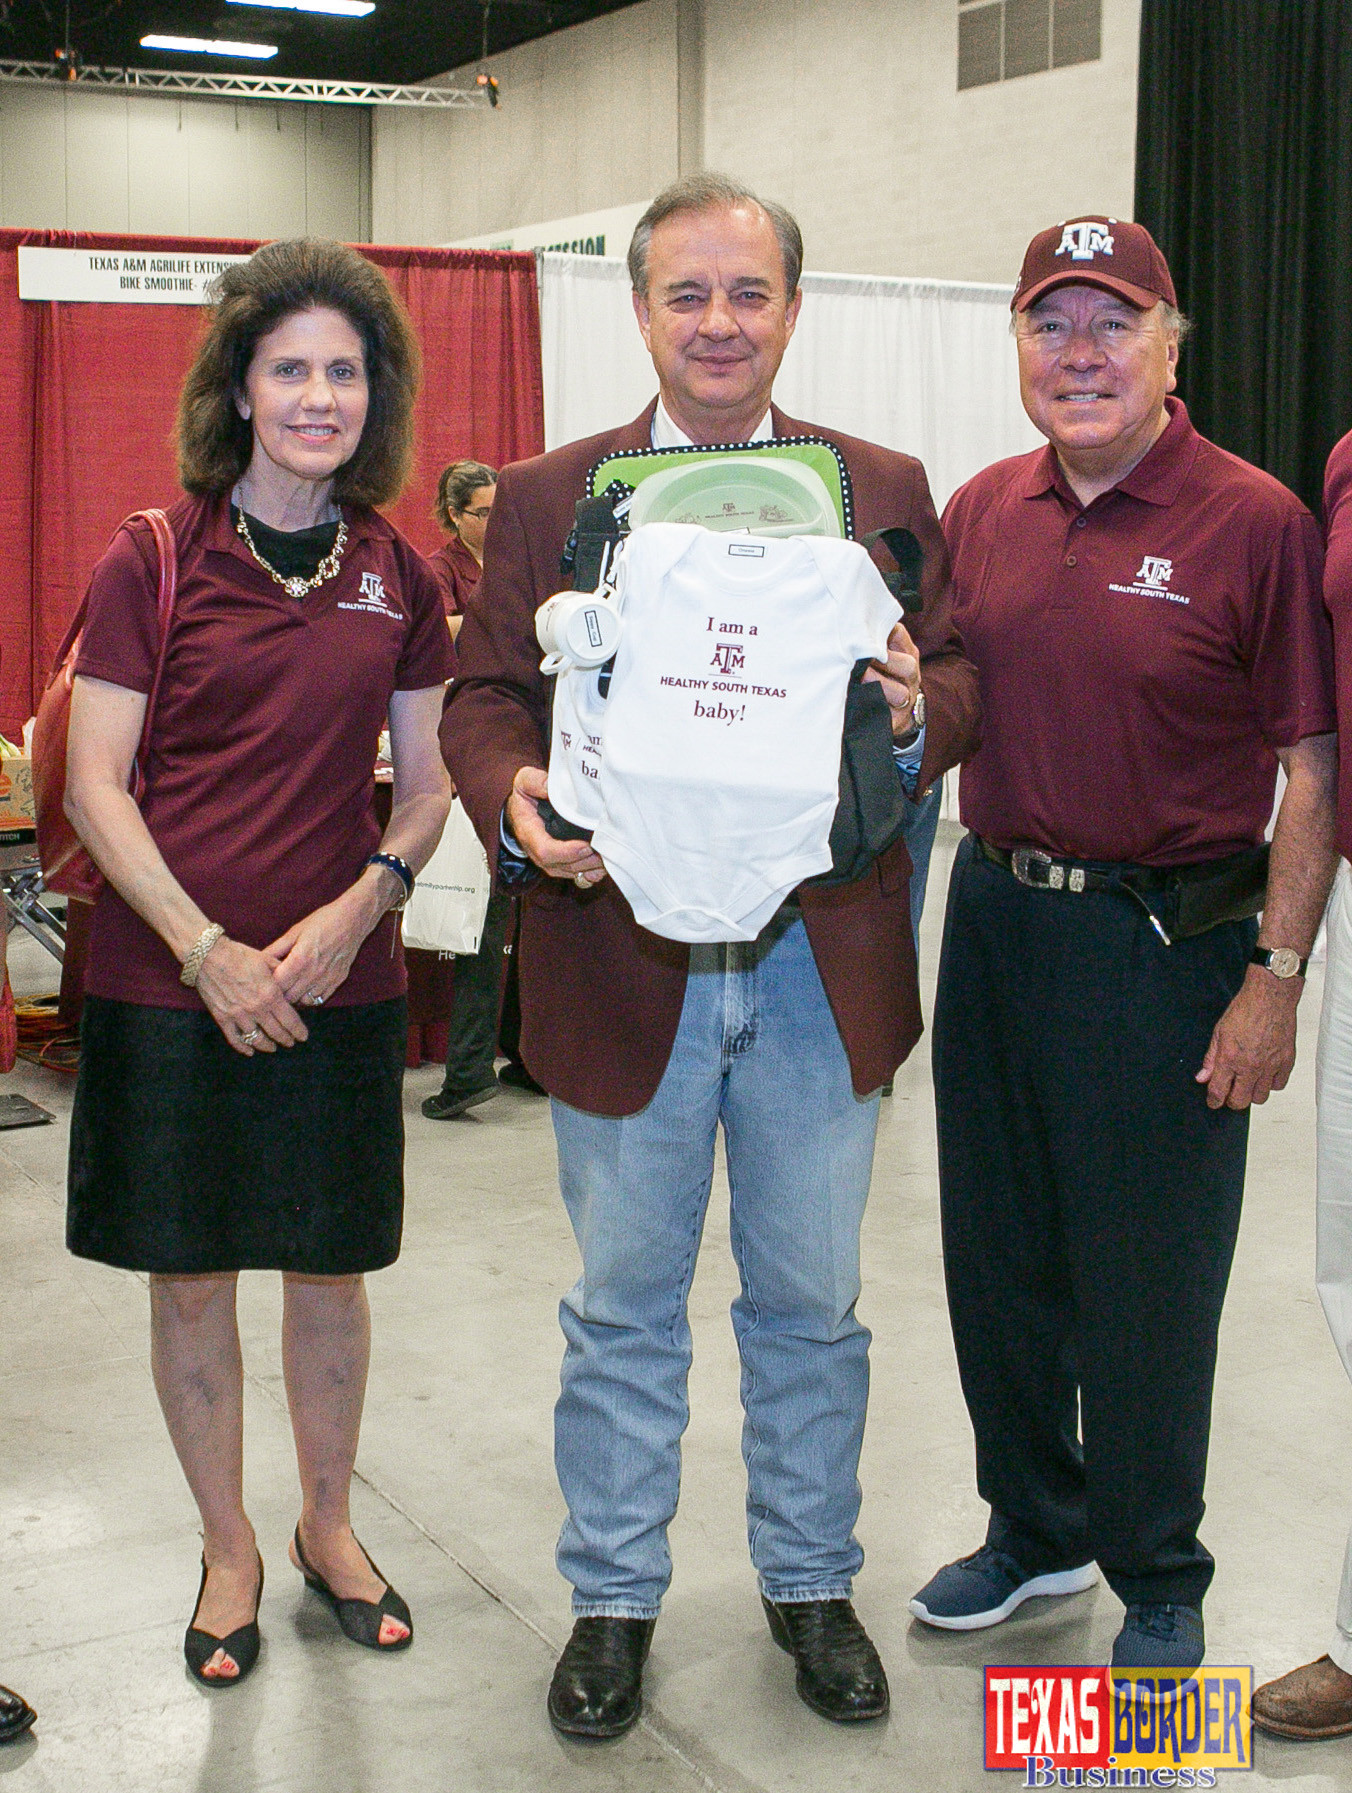 Pictured from from left: Charlotte Sharp, Texas A&M Chancellor John Sharp and Texas Senator Juan “Chuy” Hinojosa. Healthy South Texas is the pilot program of Healthy Texas—and soon efforts will infiltrate the entire state.The event offered education and information about lifestyle changes to improve the well-being and health of more than 1,600 expectant mothers, young parents and their families. In attendance (not in picture) also were  McAllen Mayor Jim Darling, Congressman Ruben Hinojosa and others. This exciting effort is to ensure the next generation of Texans lives long, healthy lives. 